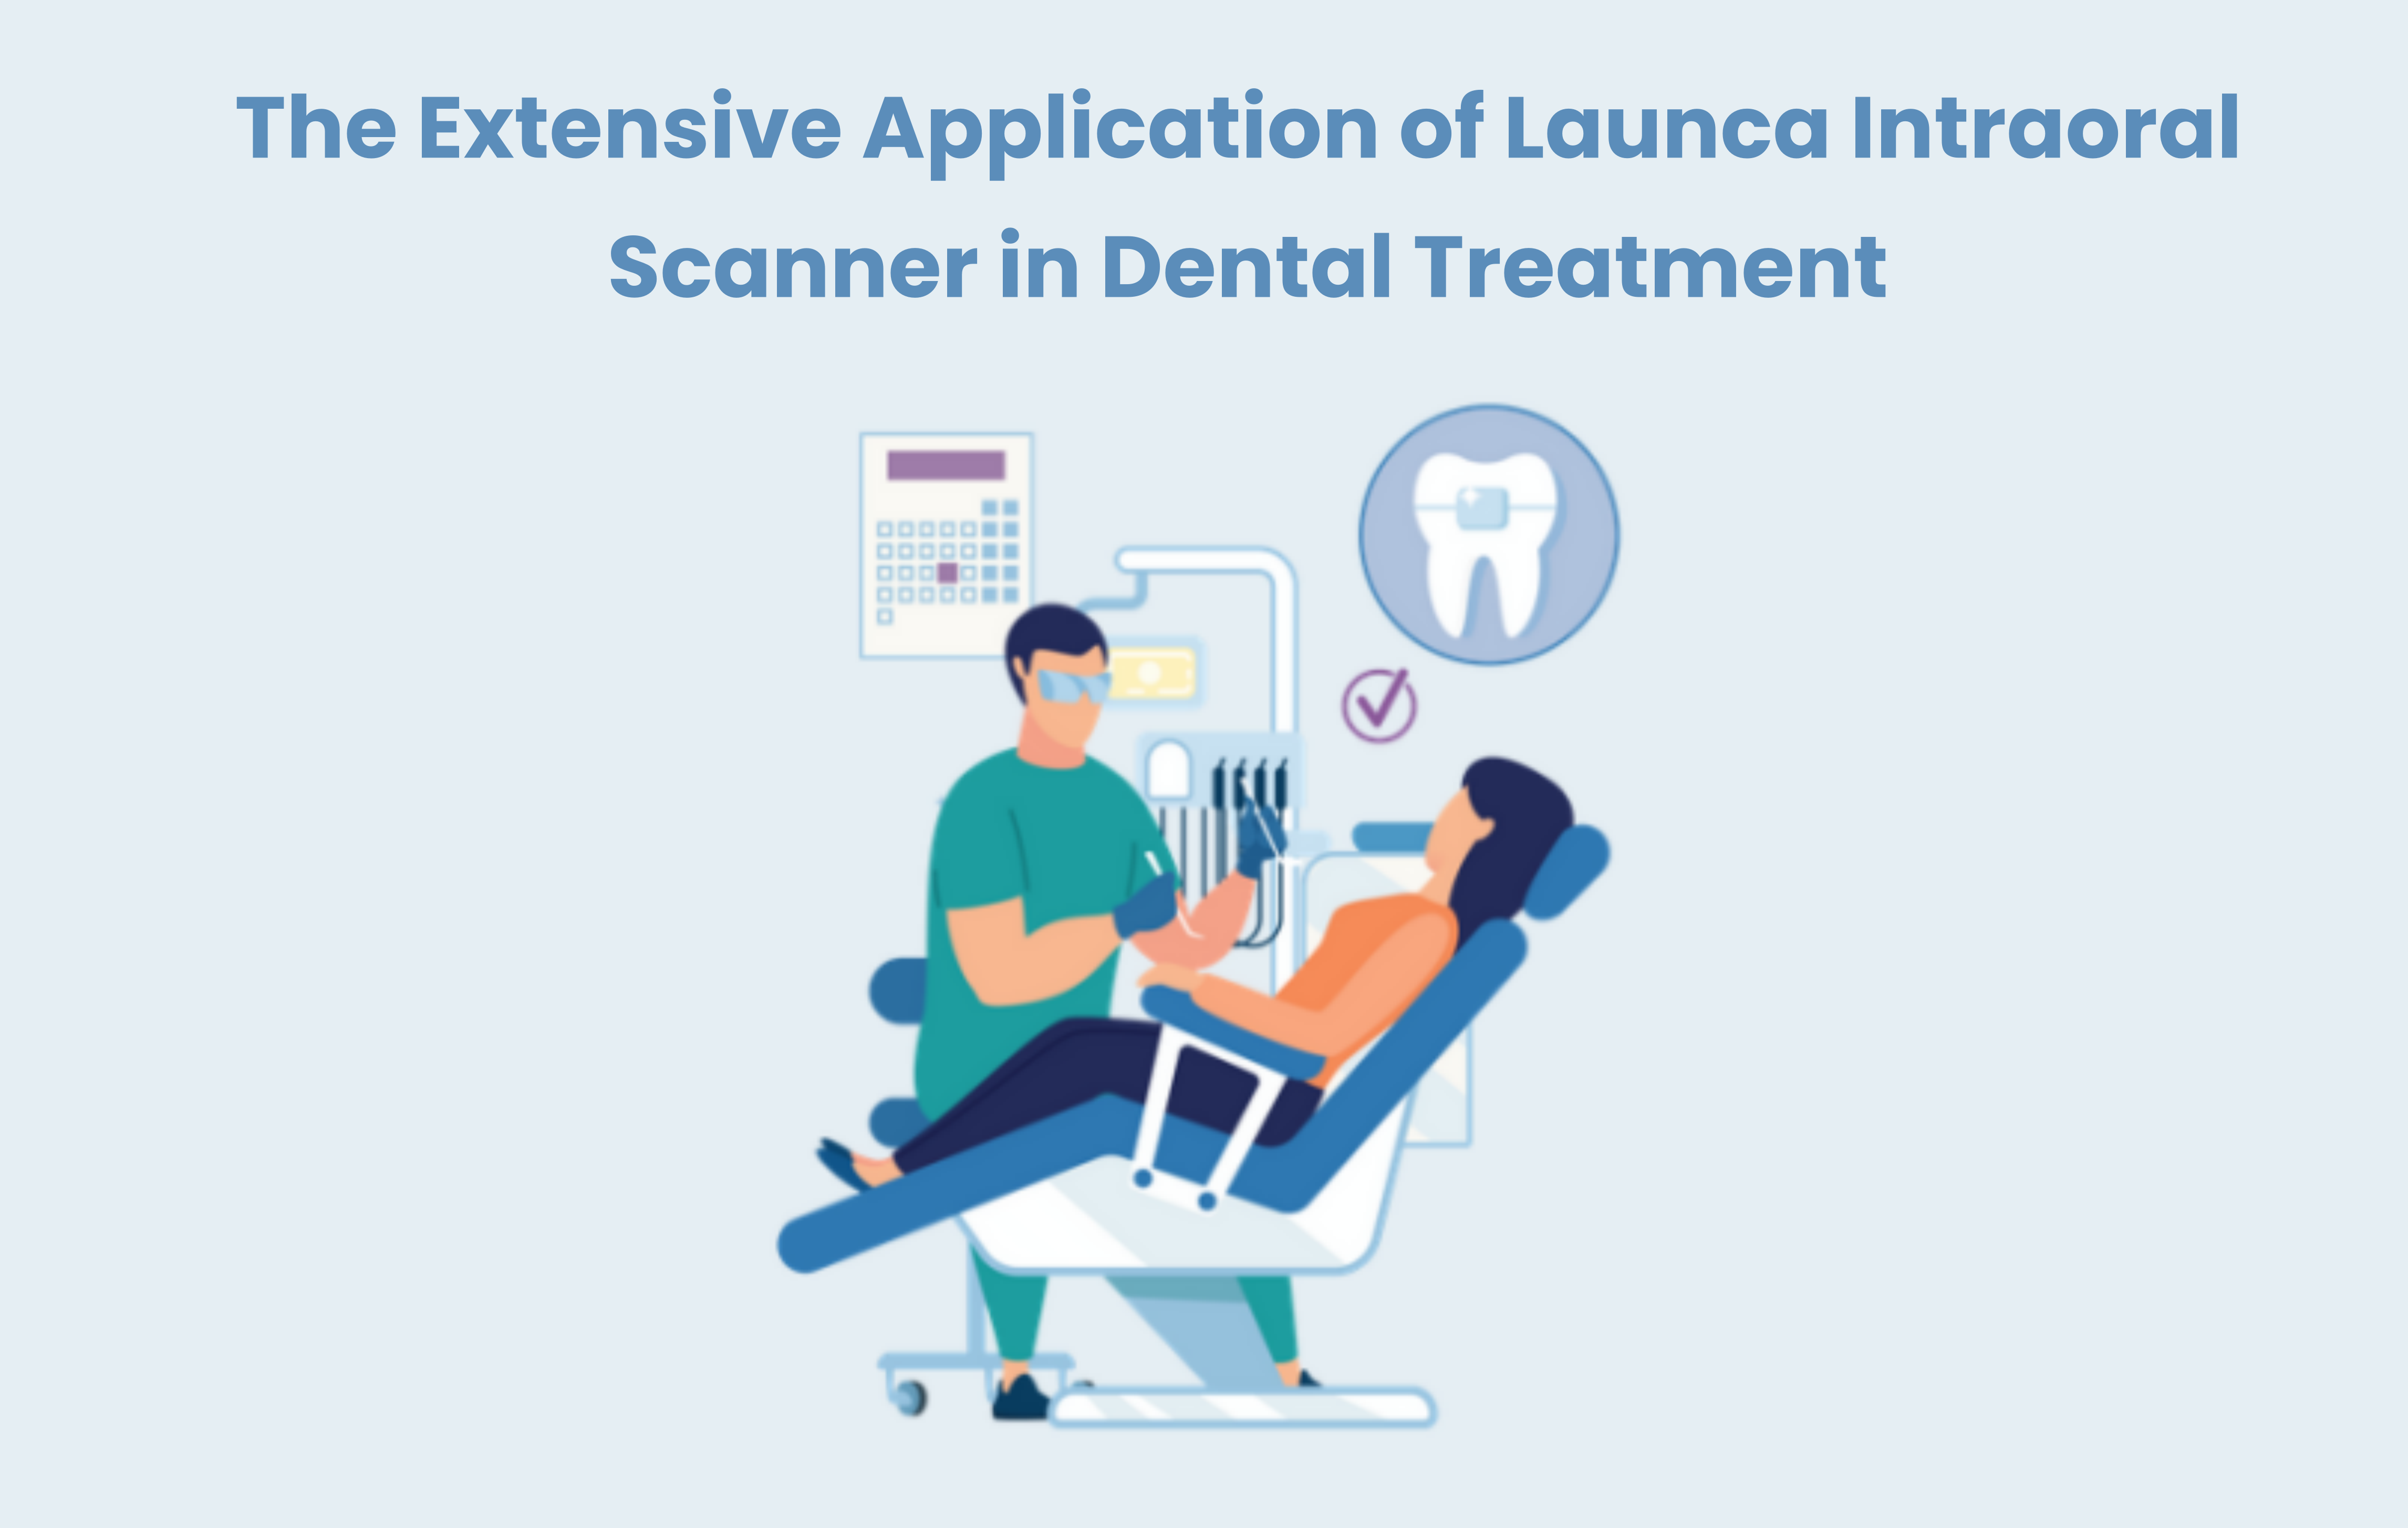 The Extensive Application of Launca Intraoral Scanner in Dental Treatment